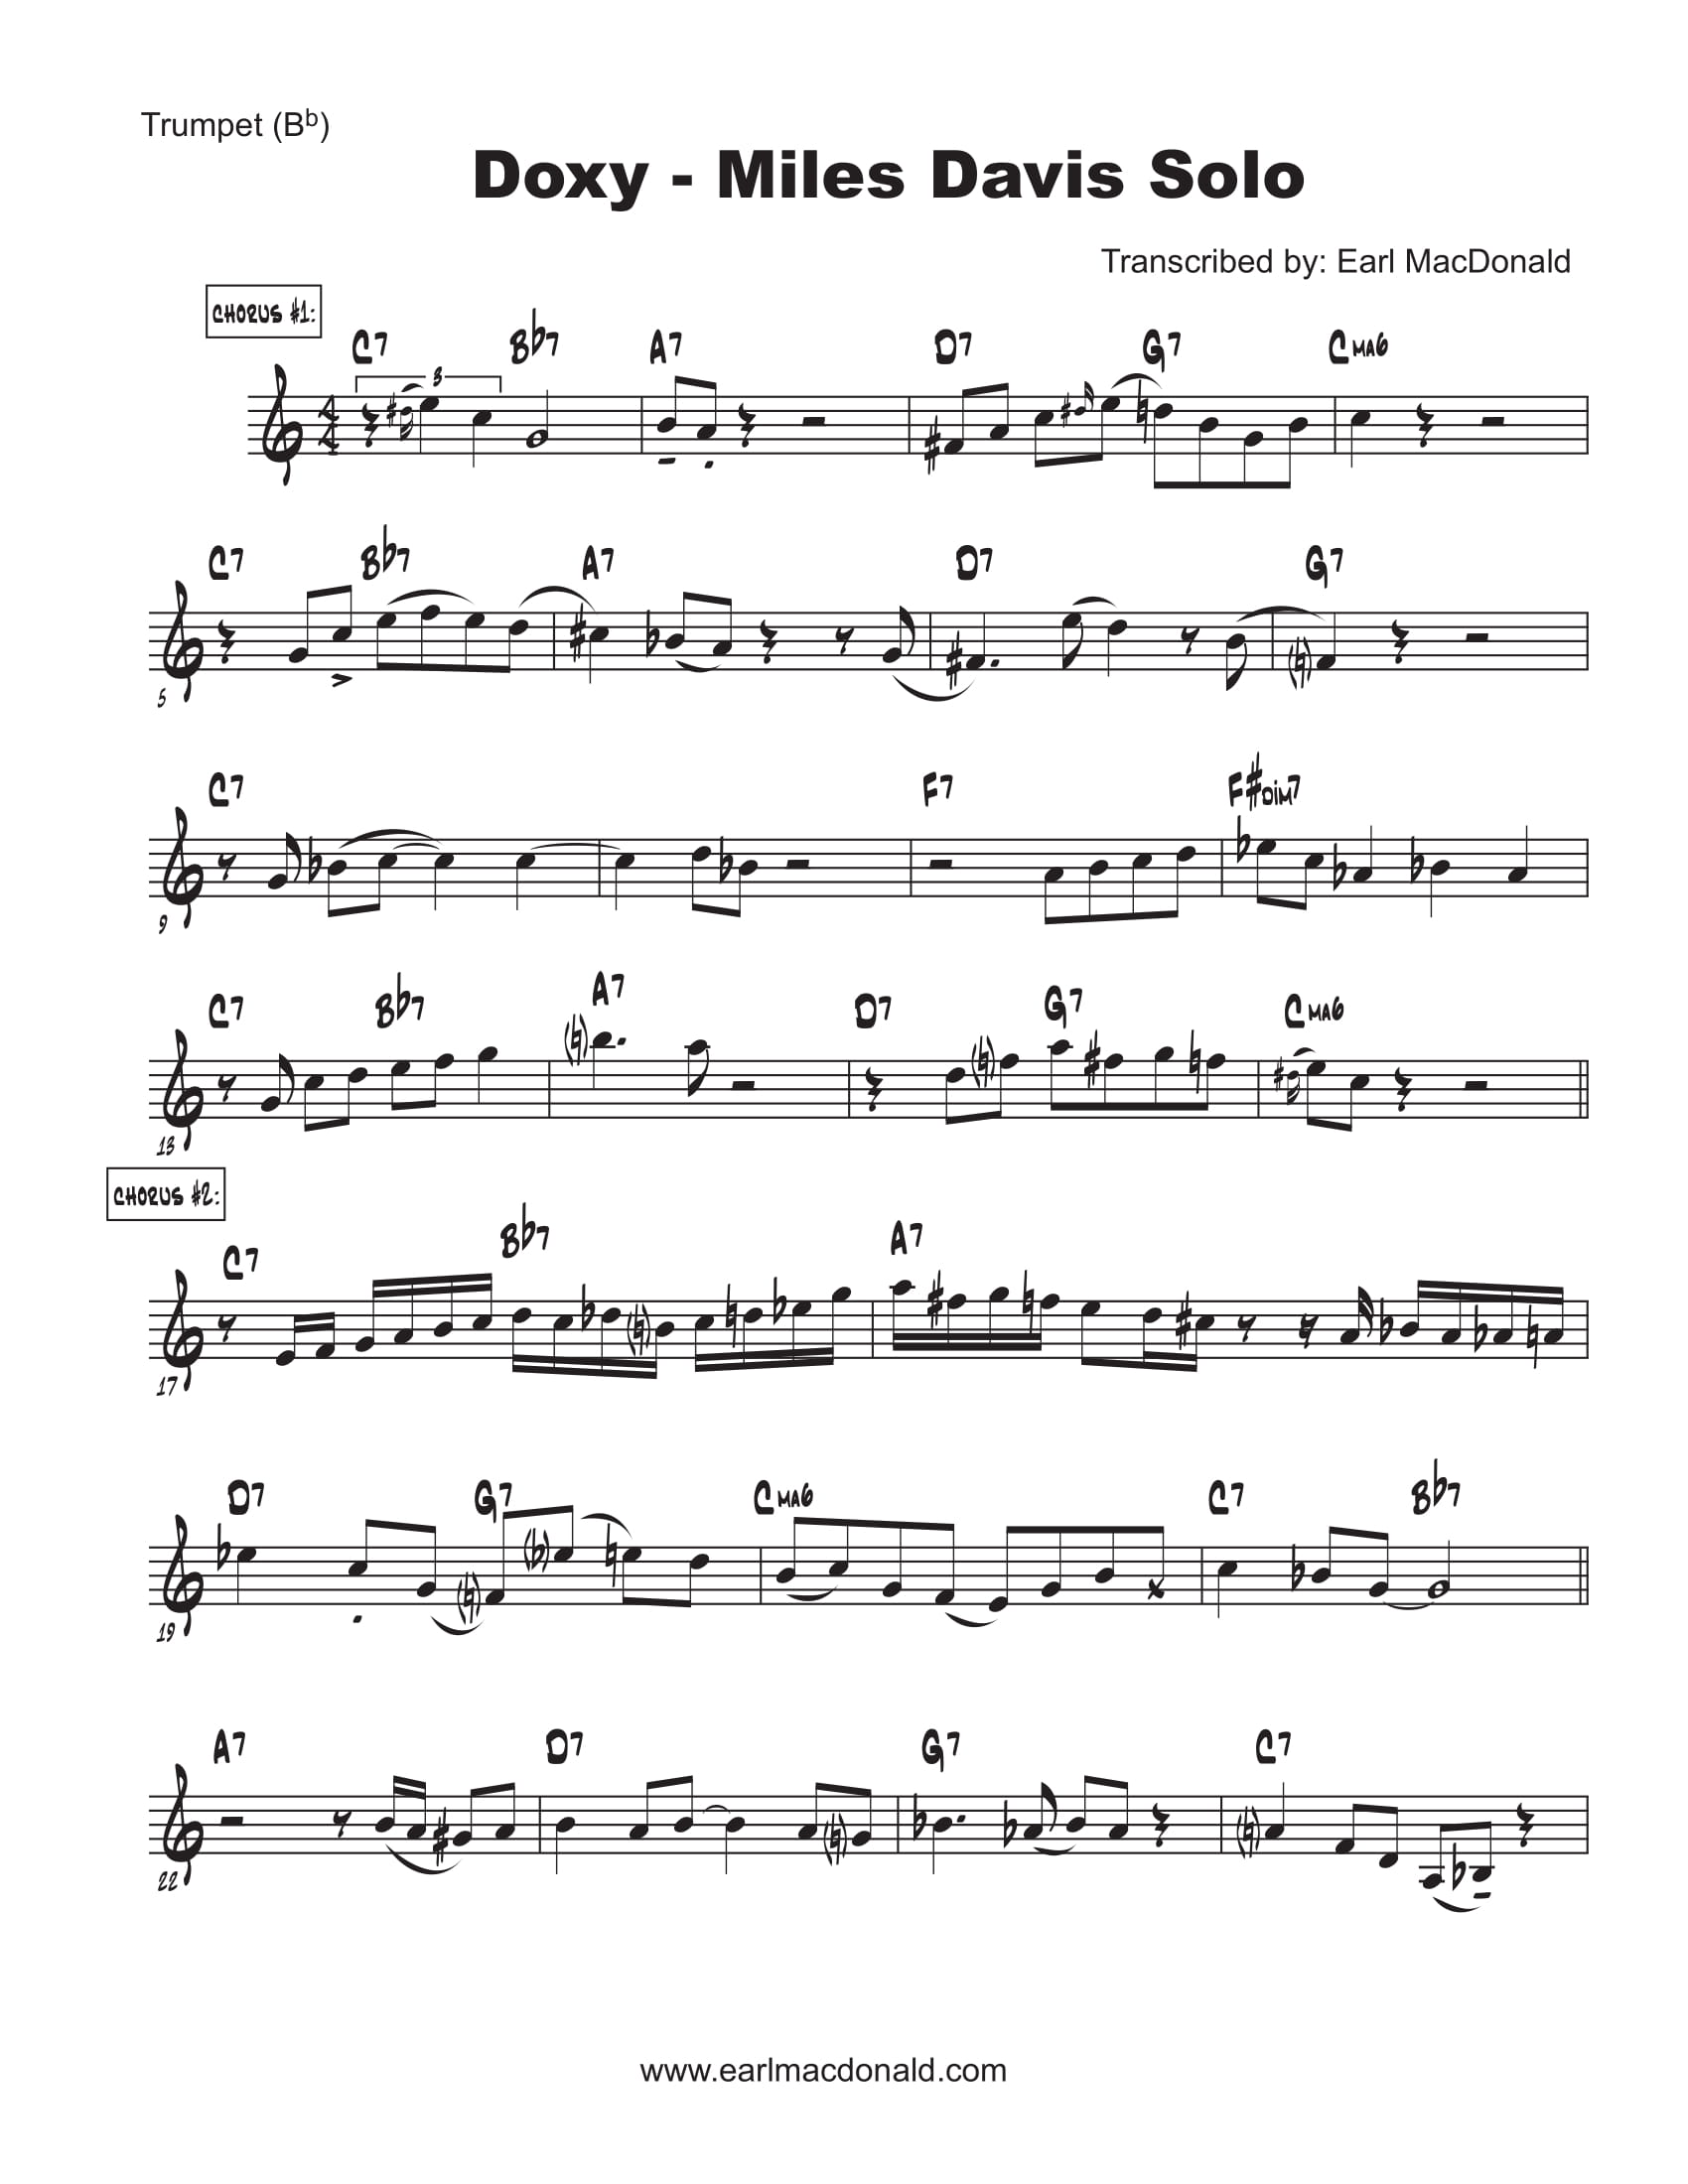 A Miles Davis solo transcription of "Doxy." for trumpet, recorded in 1954. (Page 1 of 2)